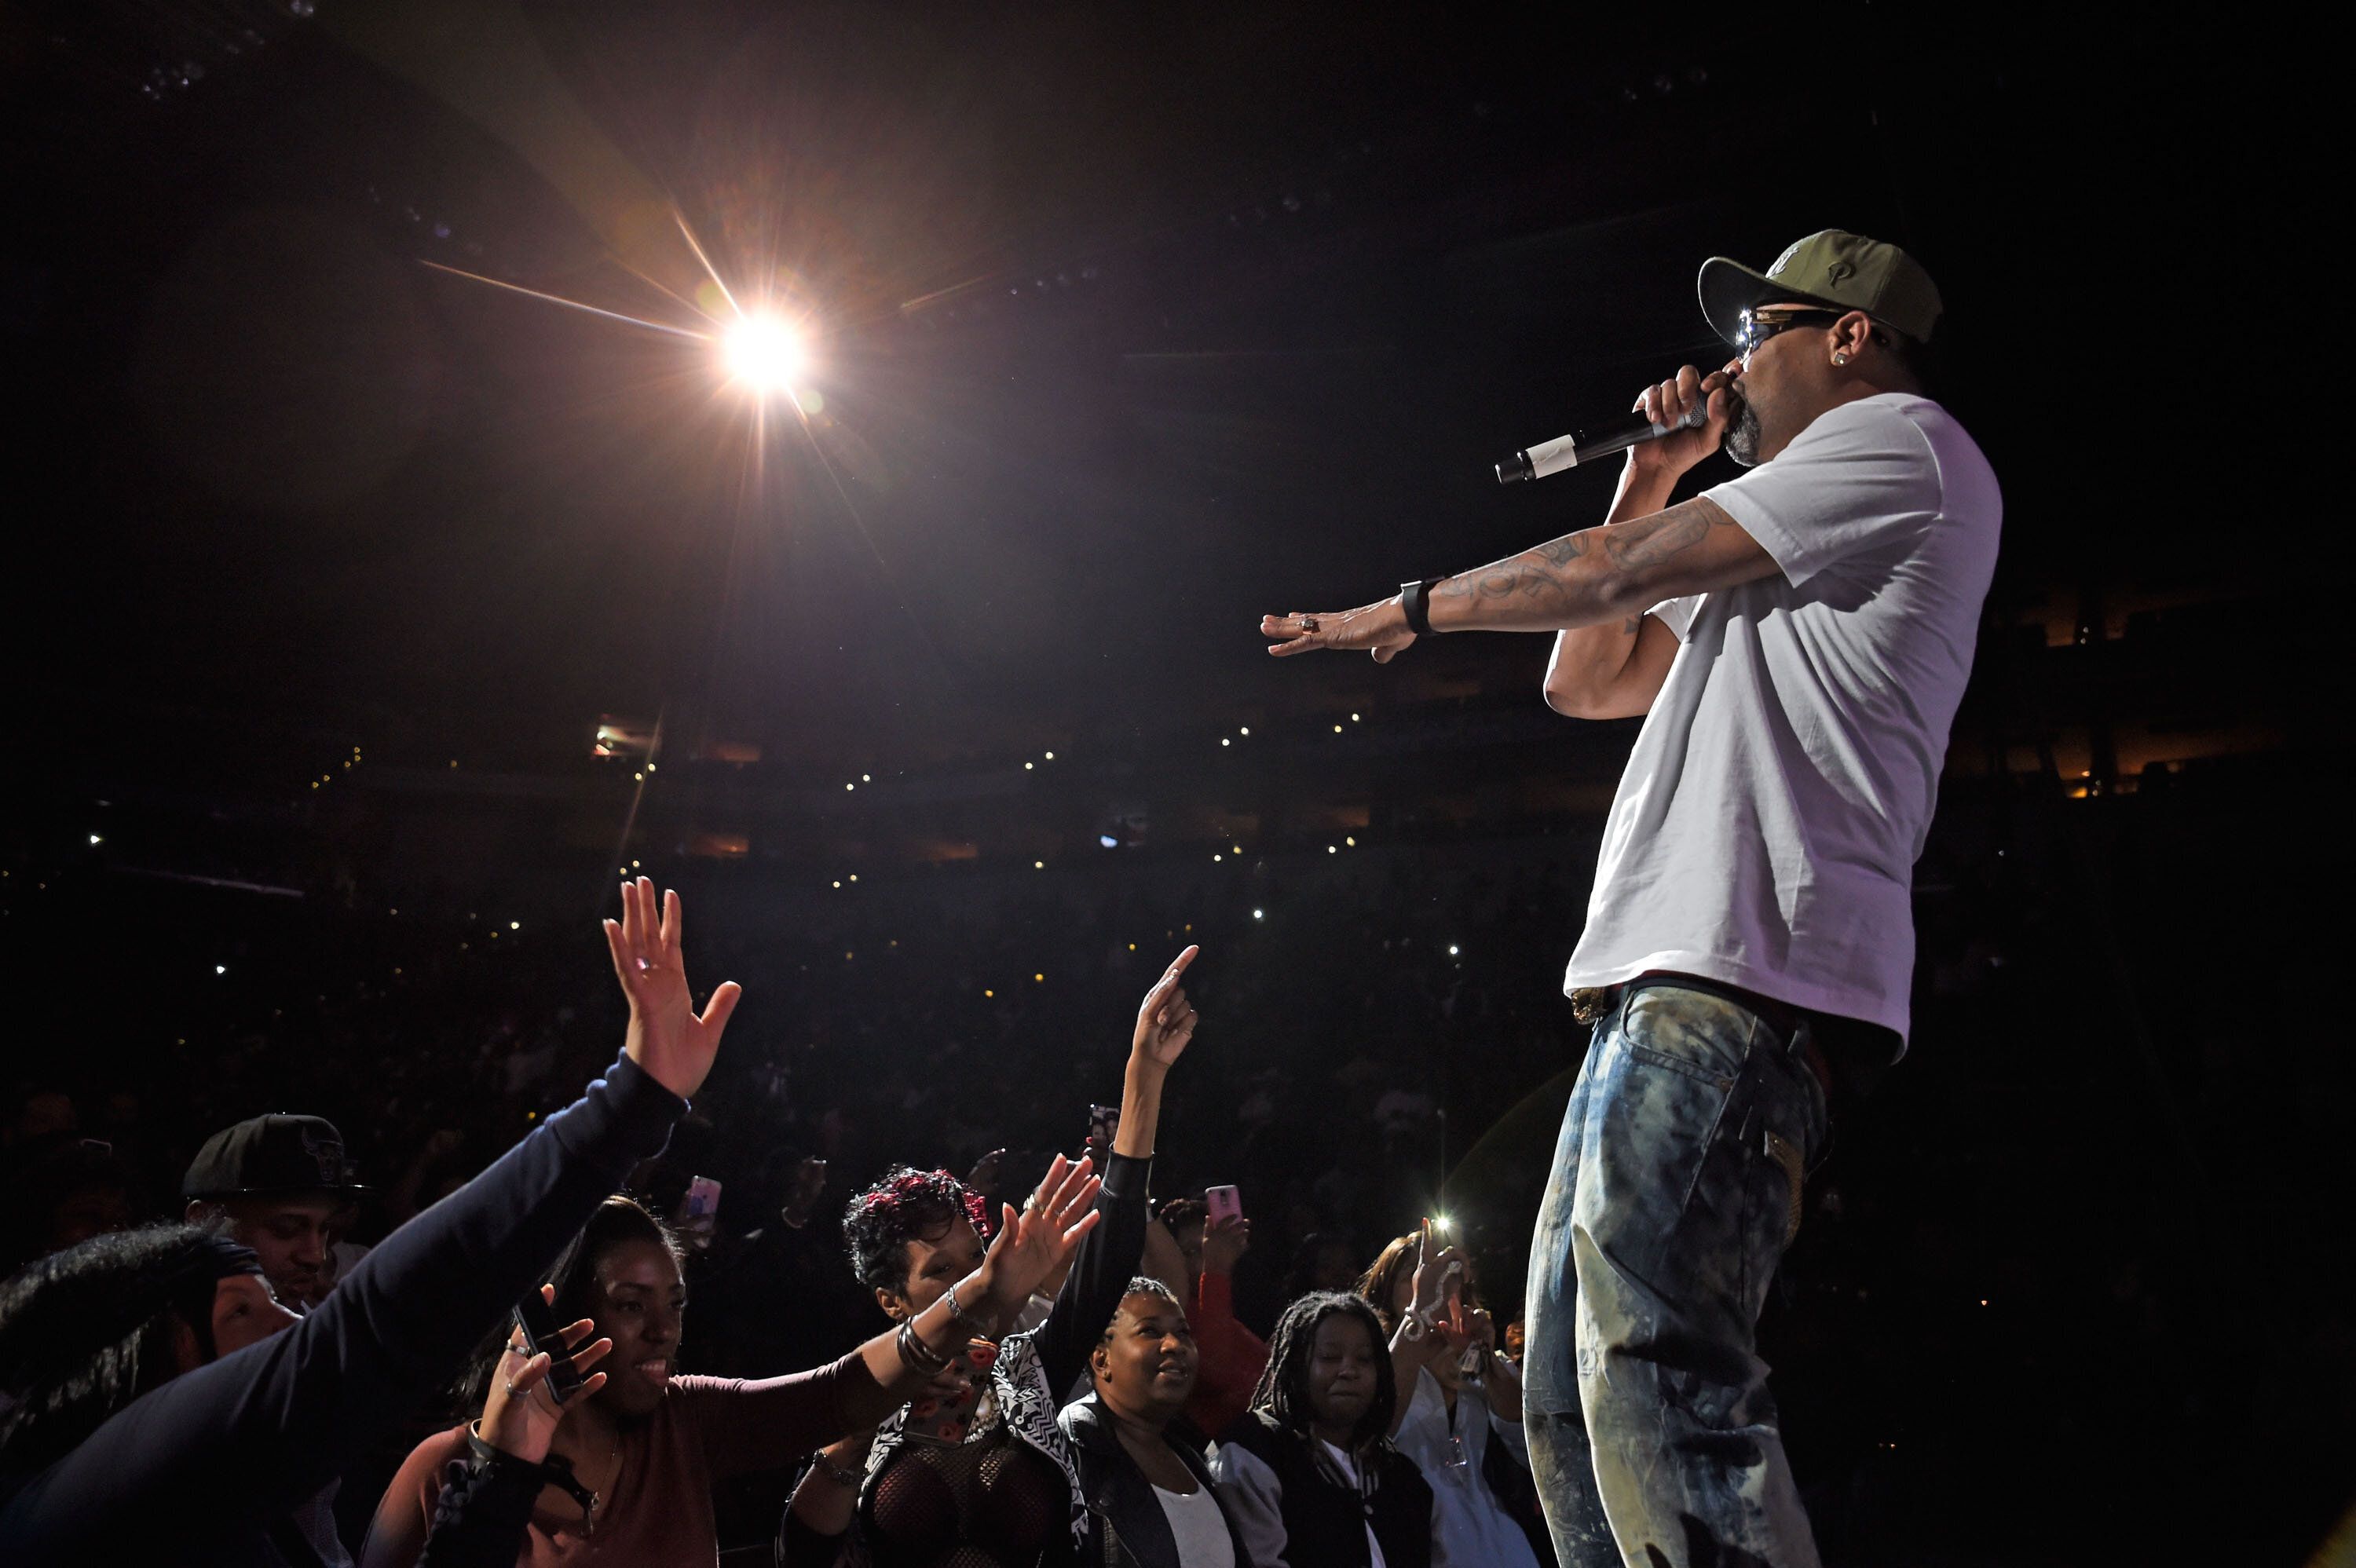 Juvenile performs during the Louisville Old School Hip Hop Festival at KFC YUM! Center on Feb. 14, 2017, in Louisville, Kentucky. (Photo by Stephen J. Cohen/Getty Images)